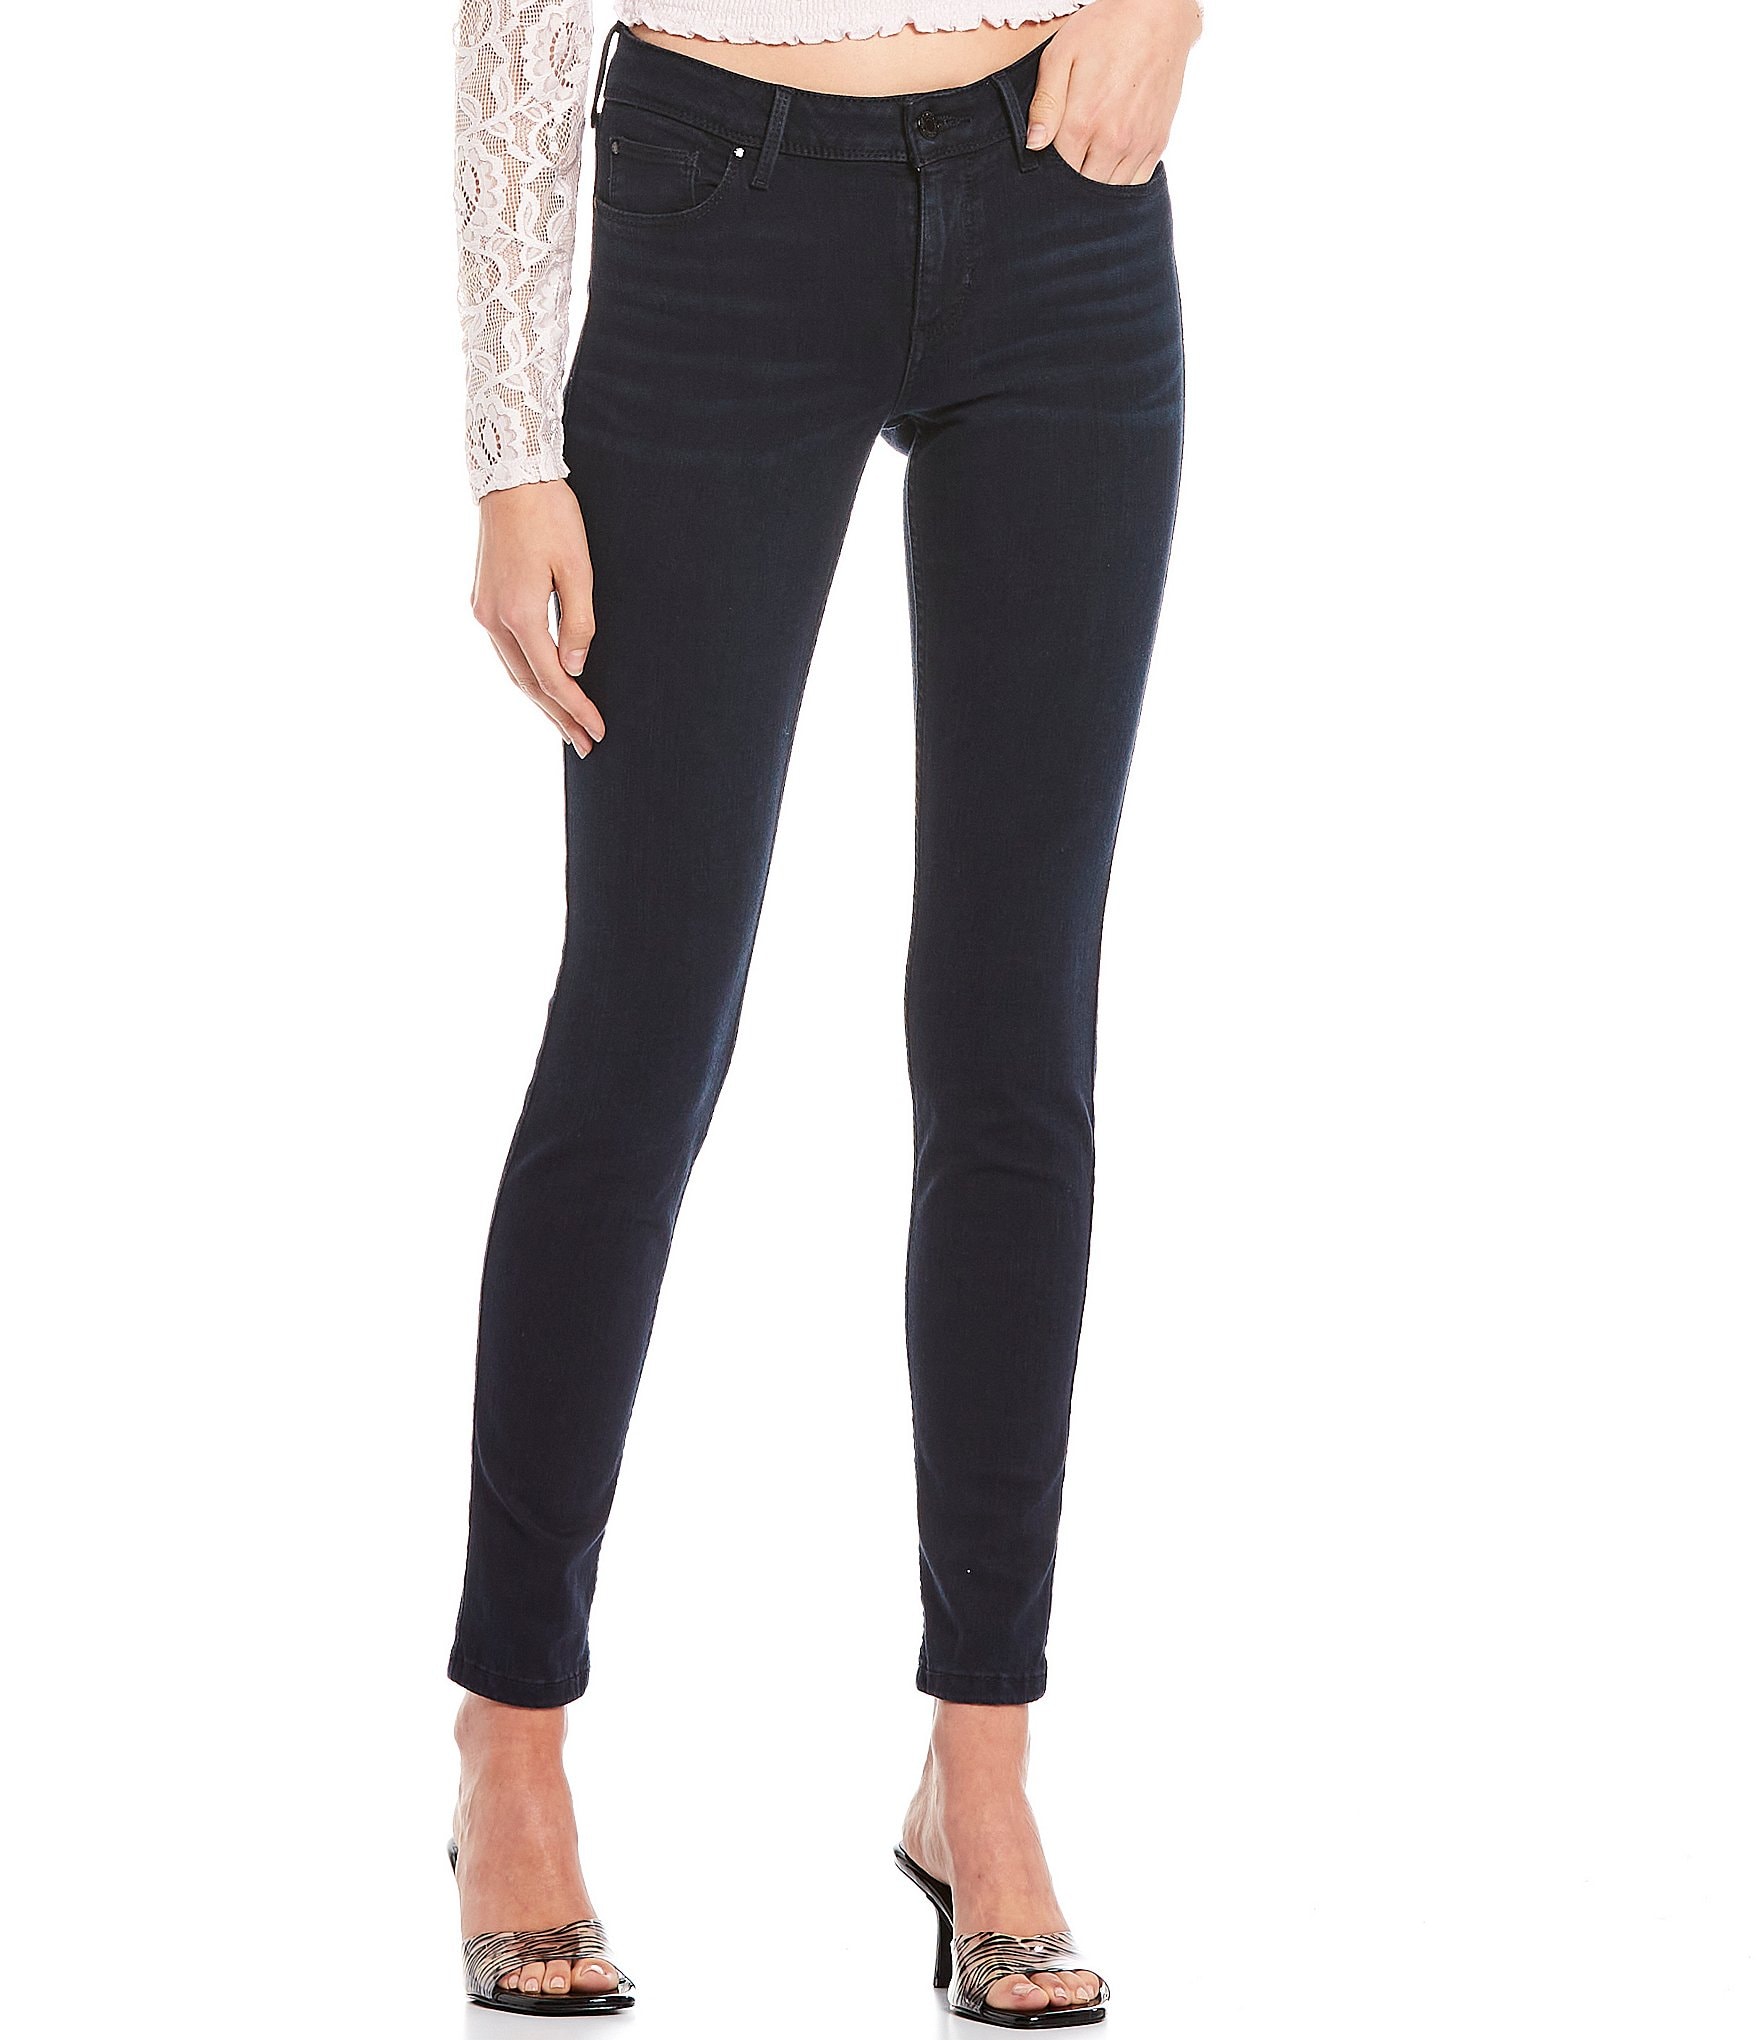 galope Flexible Surgir Guess Power Mid Rise Skinny Jeans | Dillard's